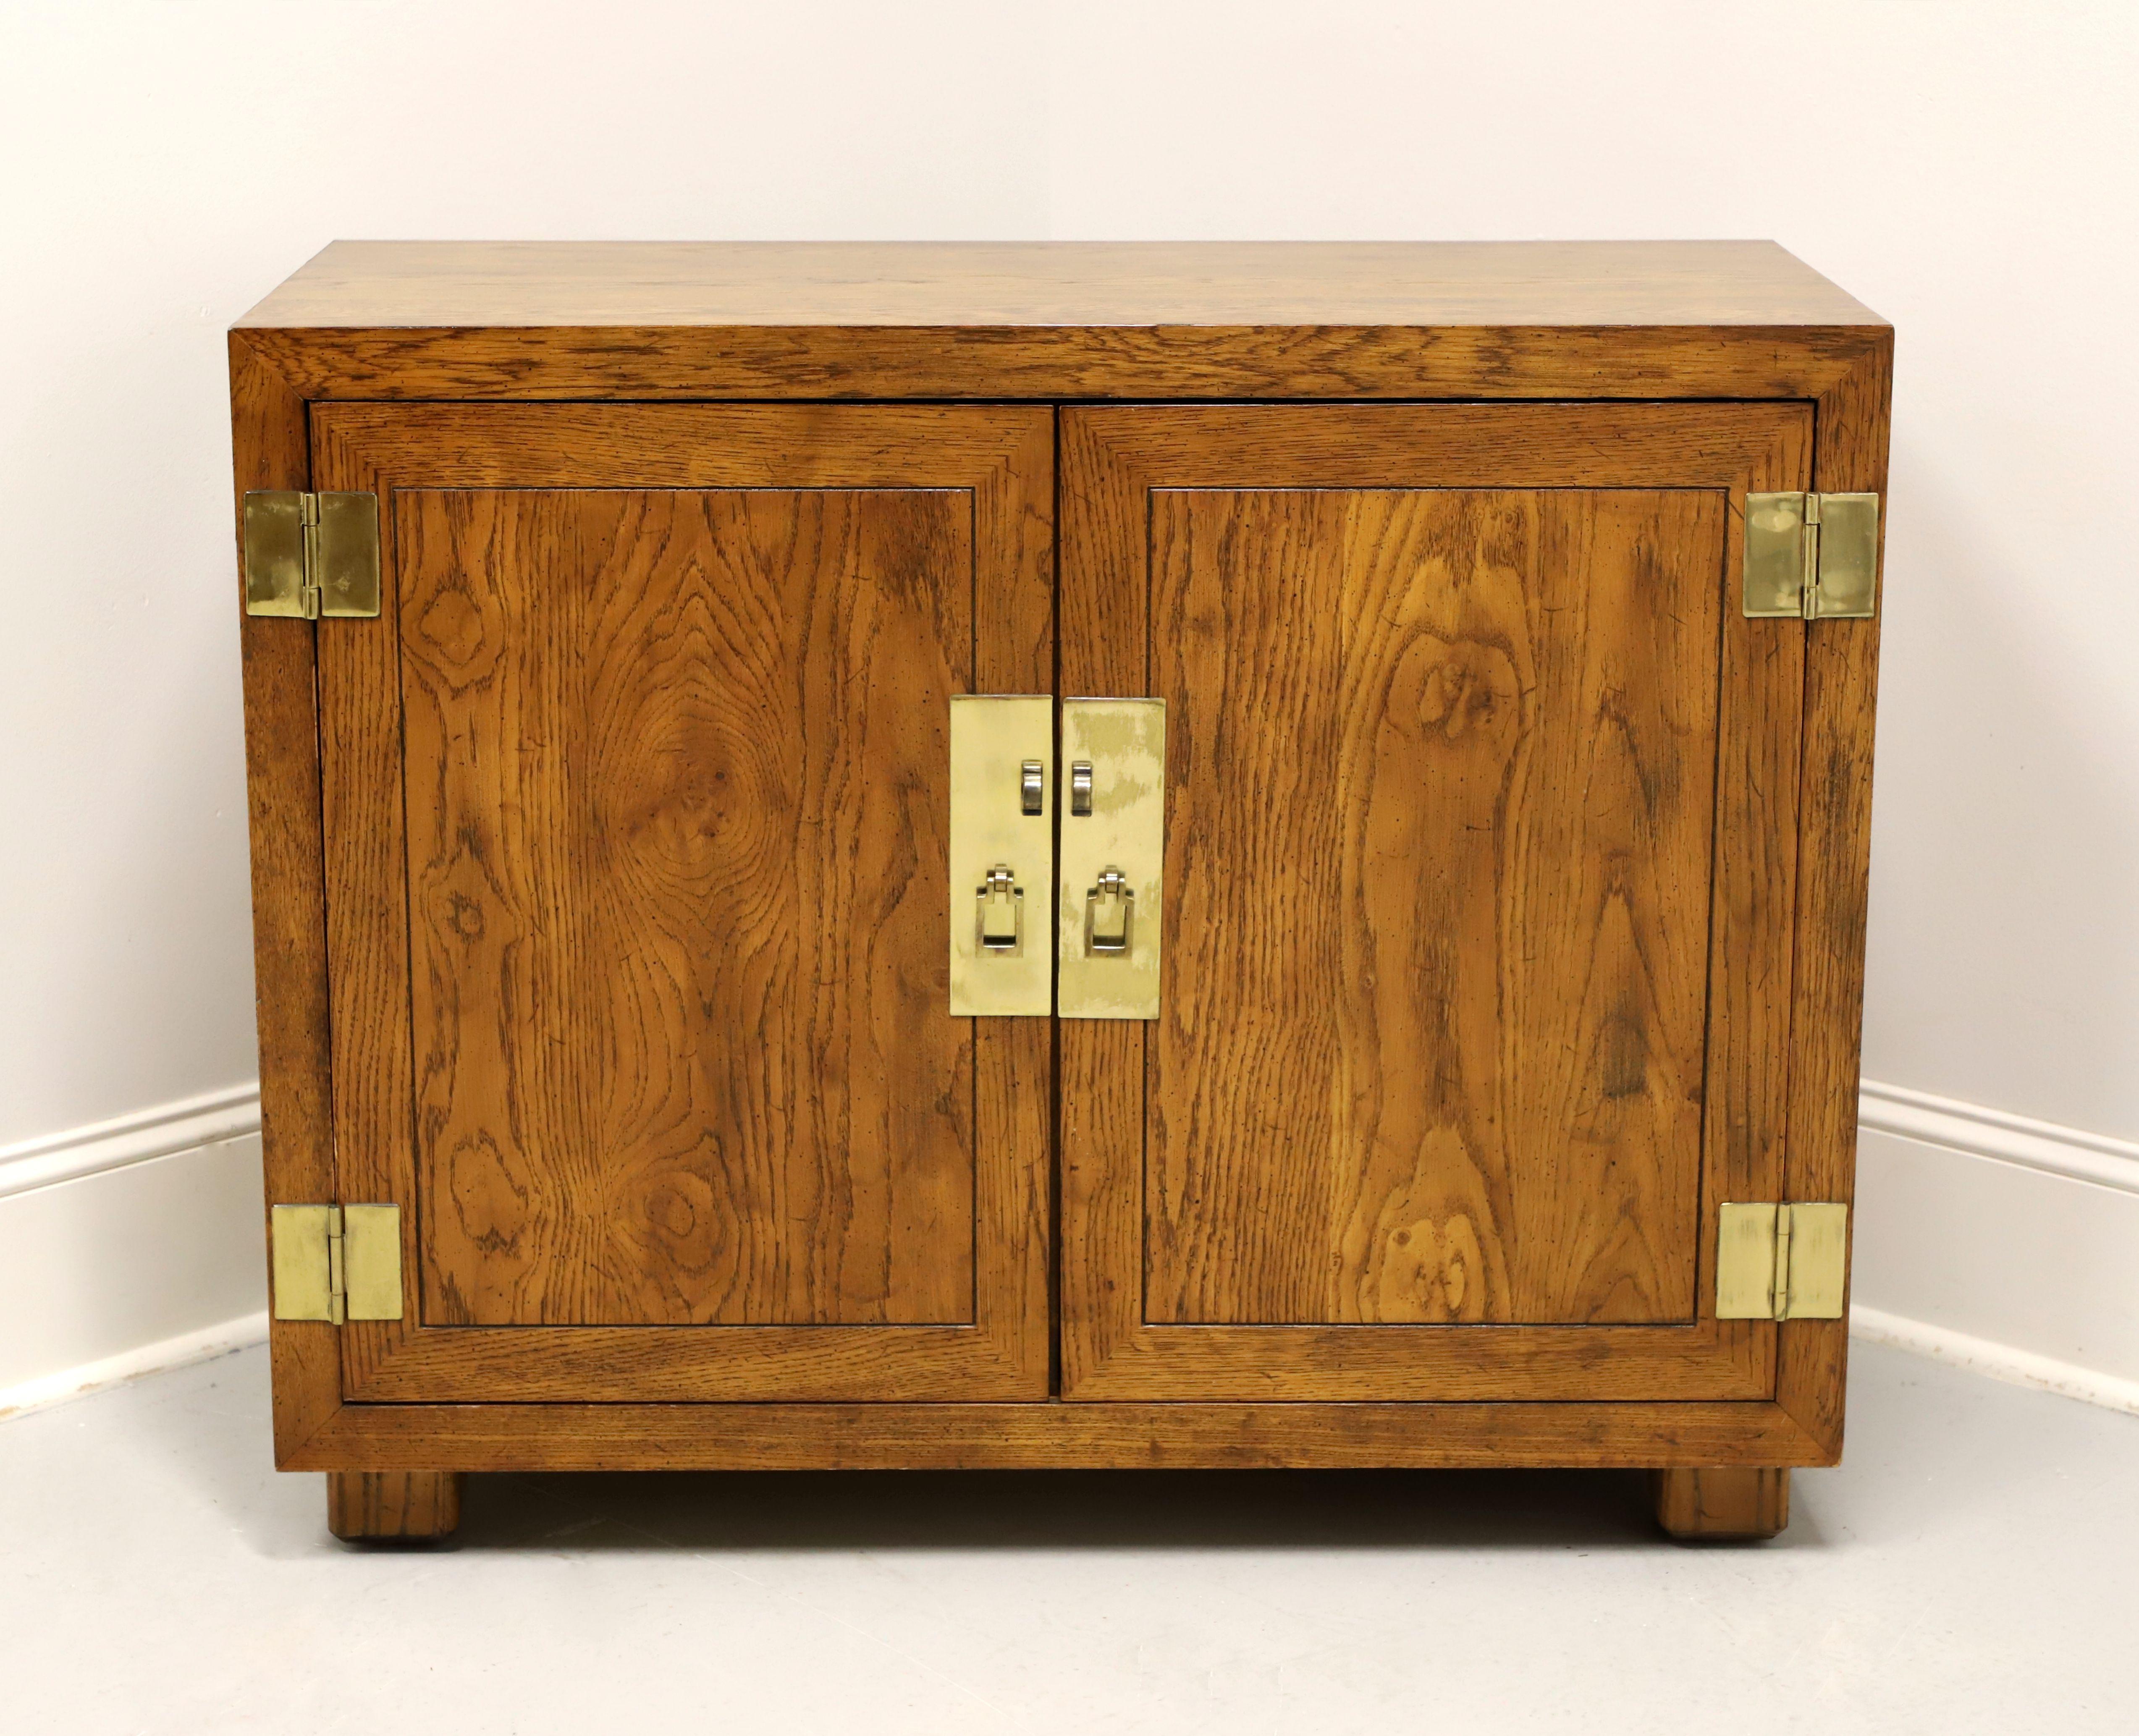 A Campaign style console cabinet by Henredon, from their Artefacts Collection. Knotty oak with slightly distressed finish, banded door fronts, smooth surface top, brass hardware, and block feet. Features a two door cabinet revealing one drawer of